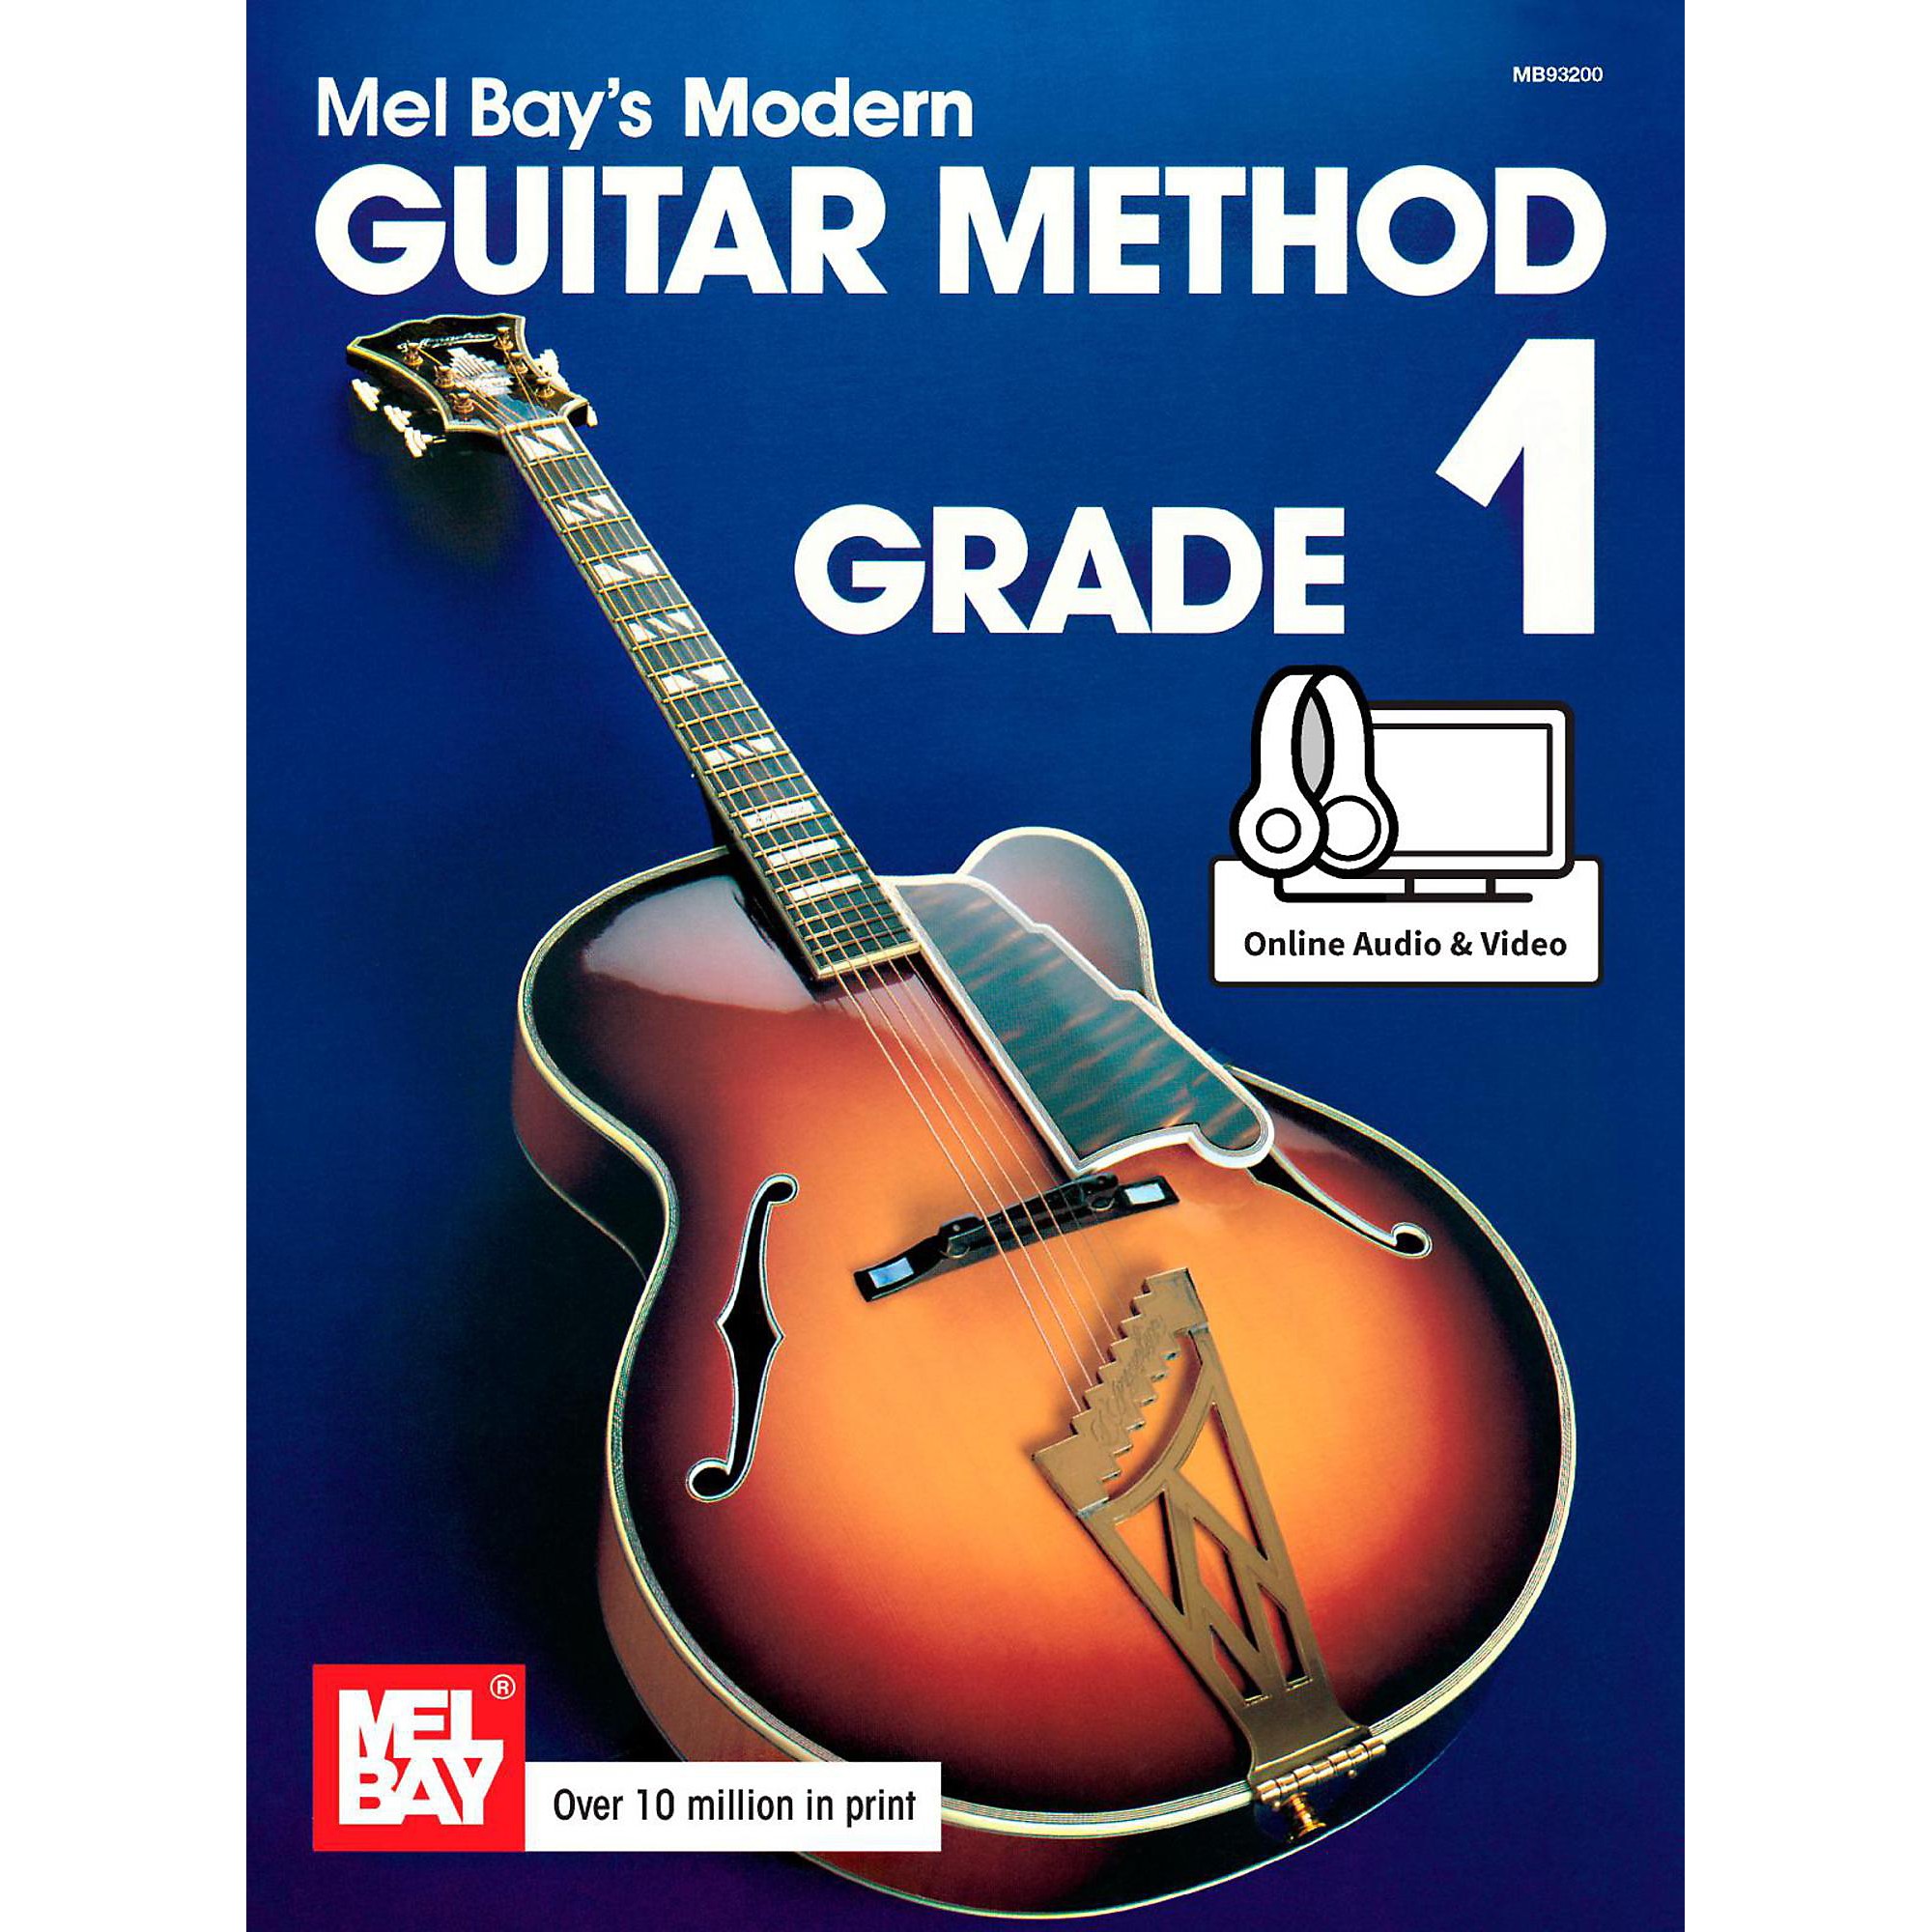 Complete Technique for Modern Guitar TAB Music Method Book SAME DAY DISPATCH 